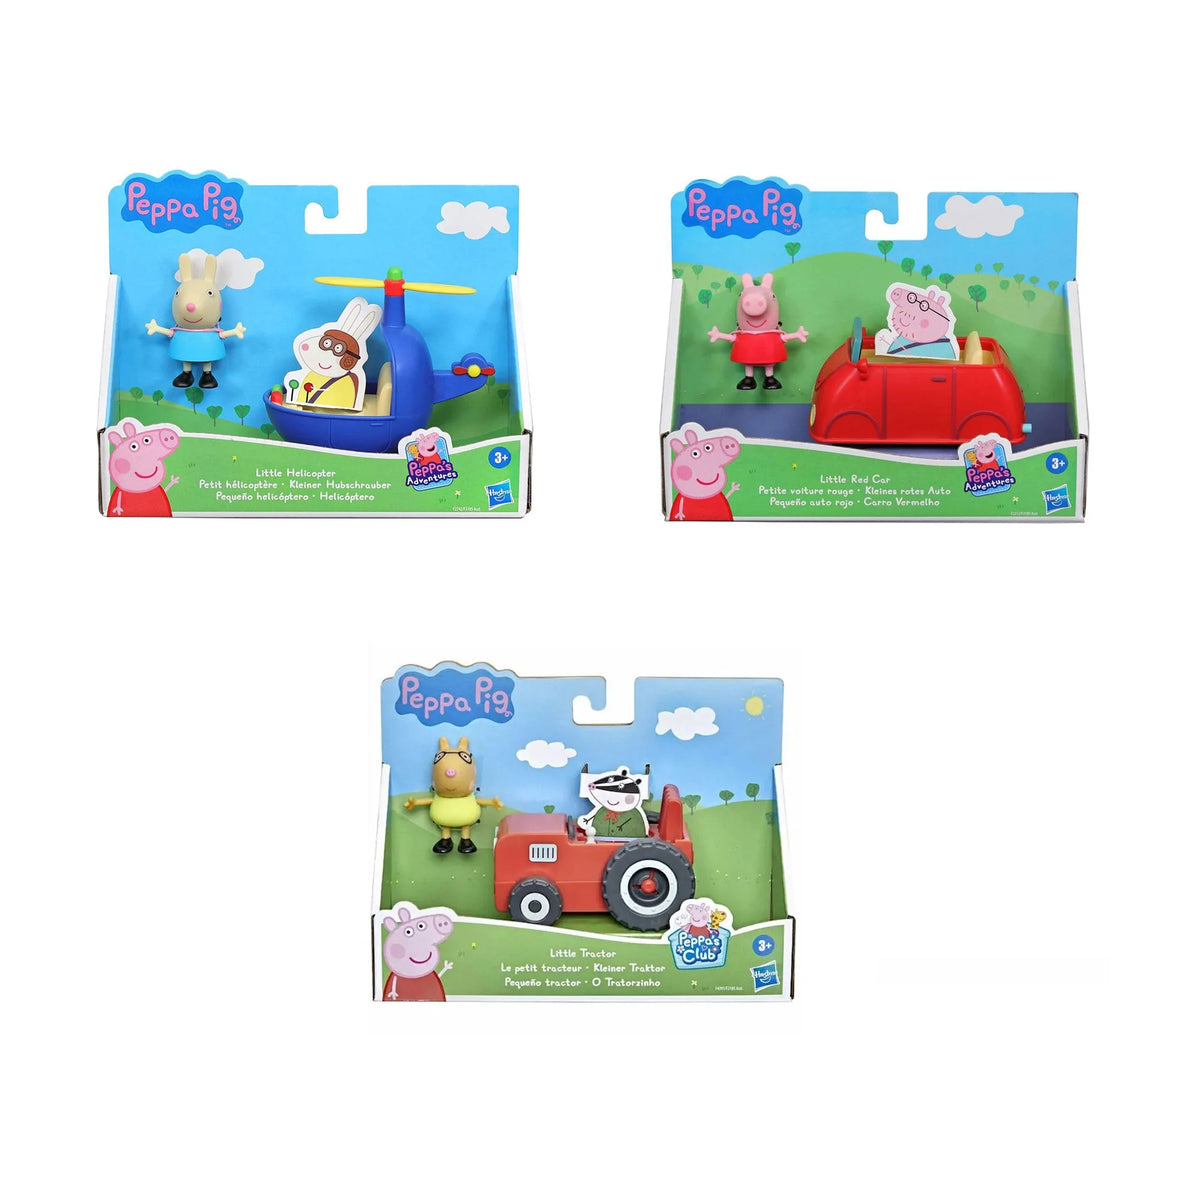 HASBRO Toys & Games Peppa Pig Vehicule, Assortment, 1 Count 5010993849918